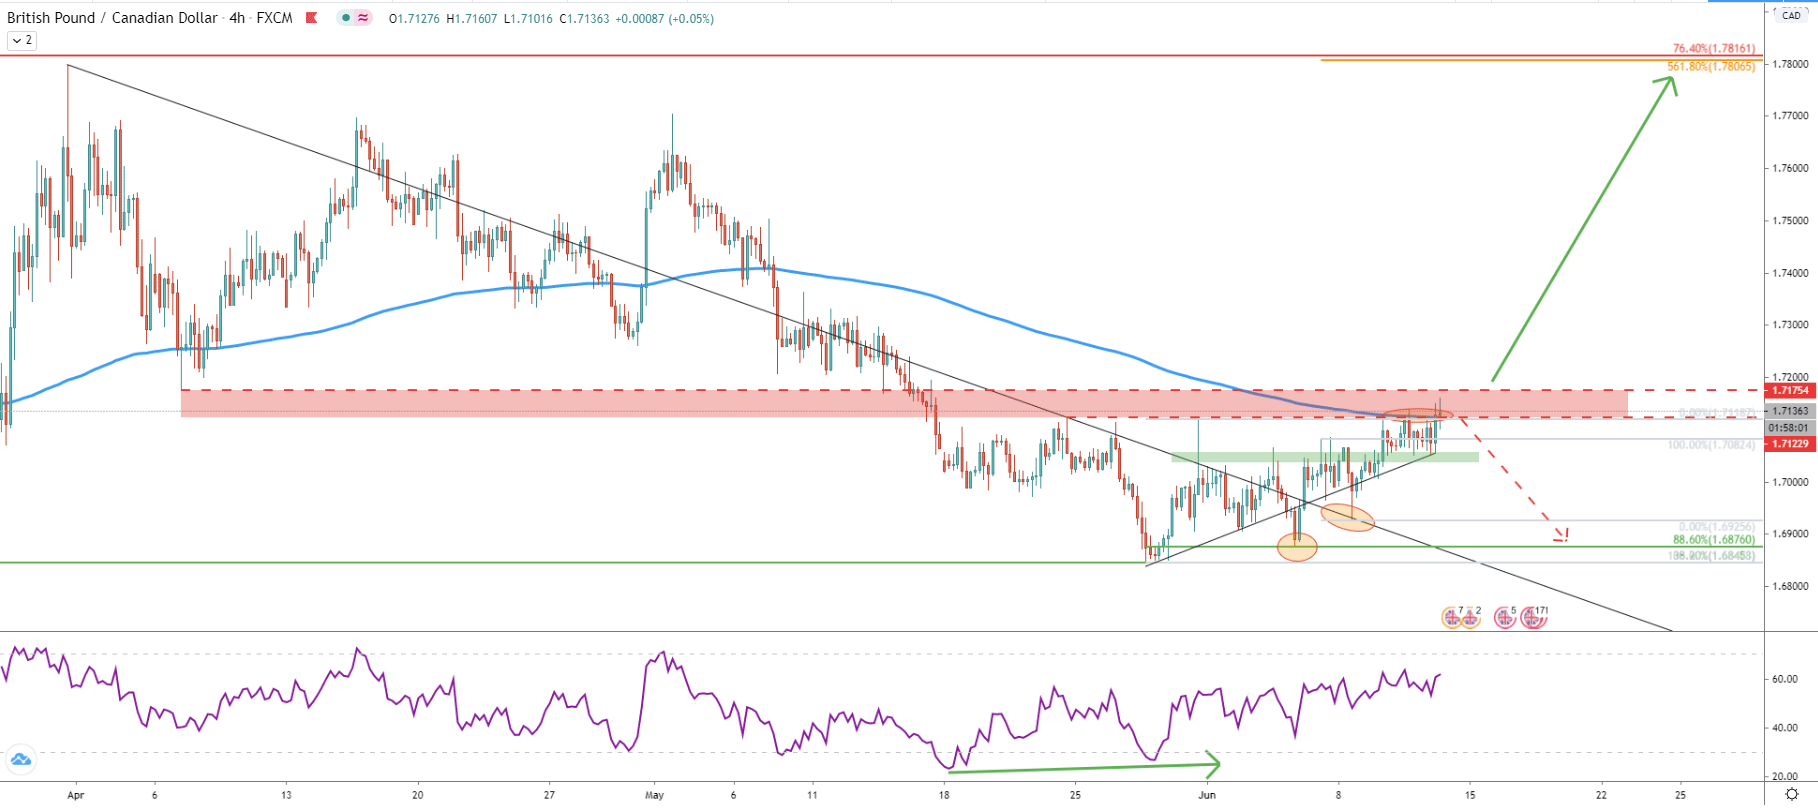 GBP/CAD 4-Hour Technical Analysis 11 June 2020